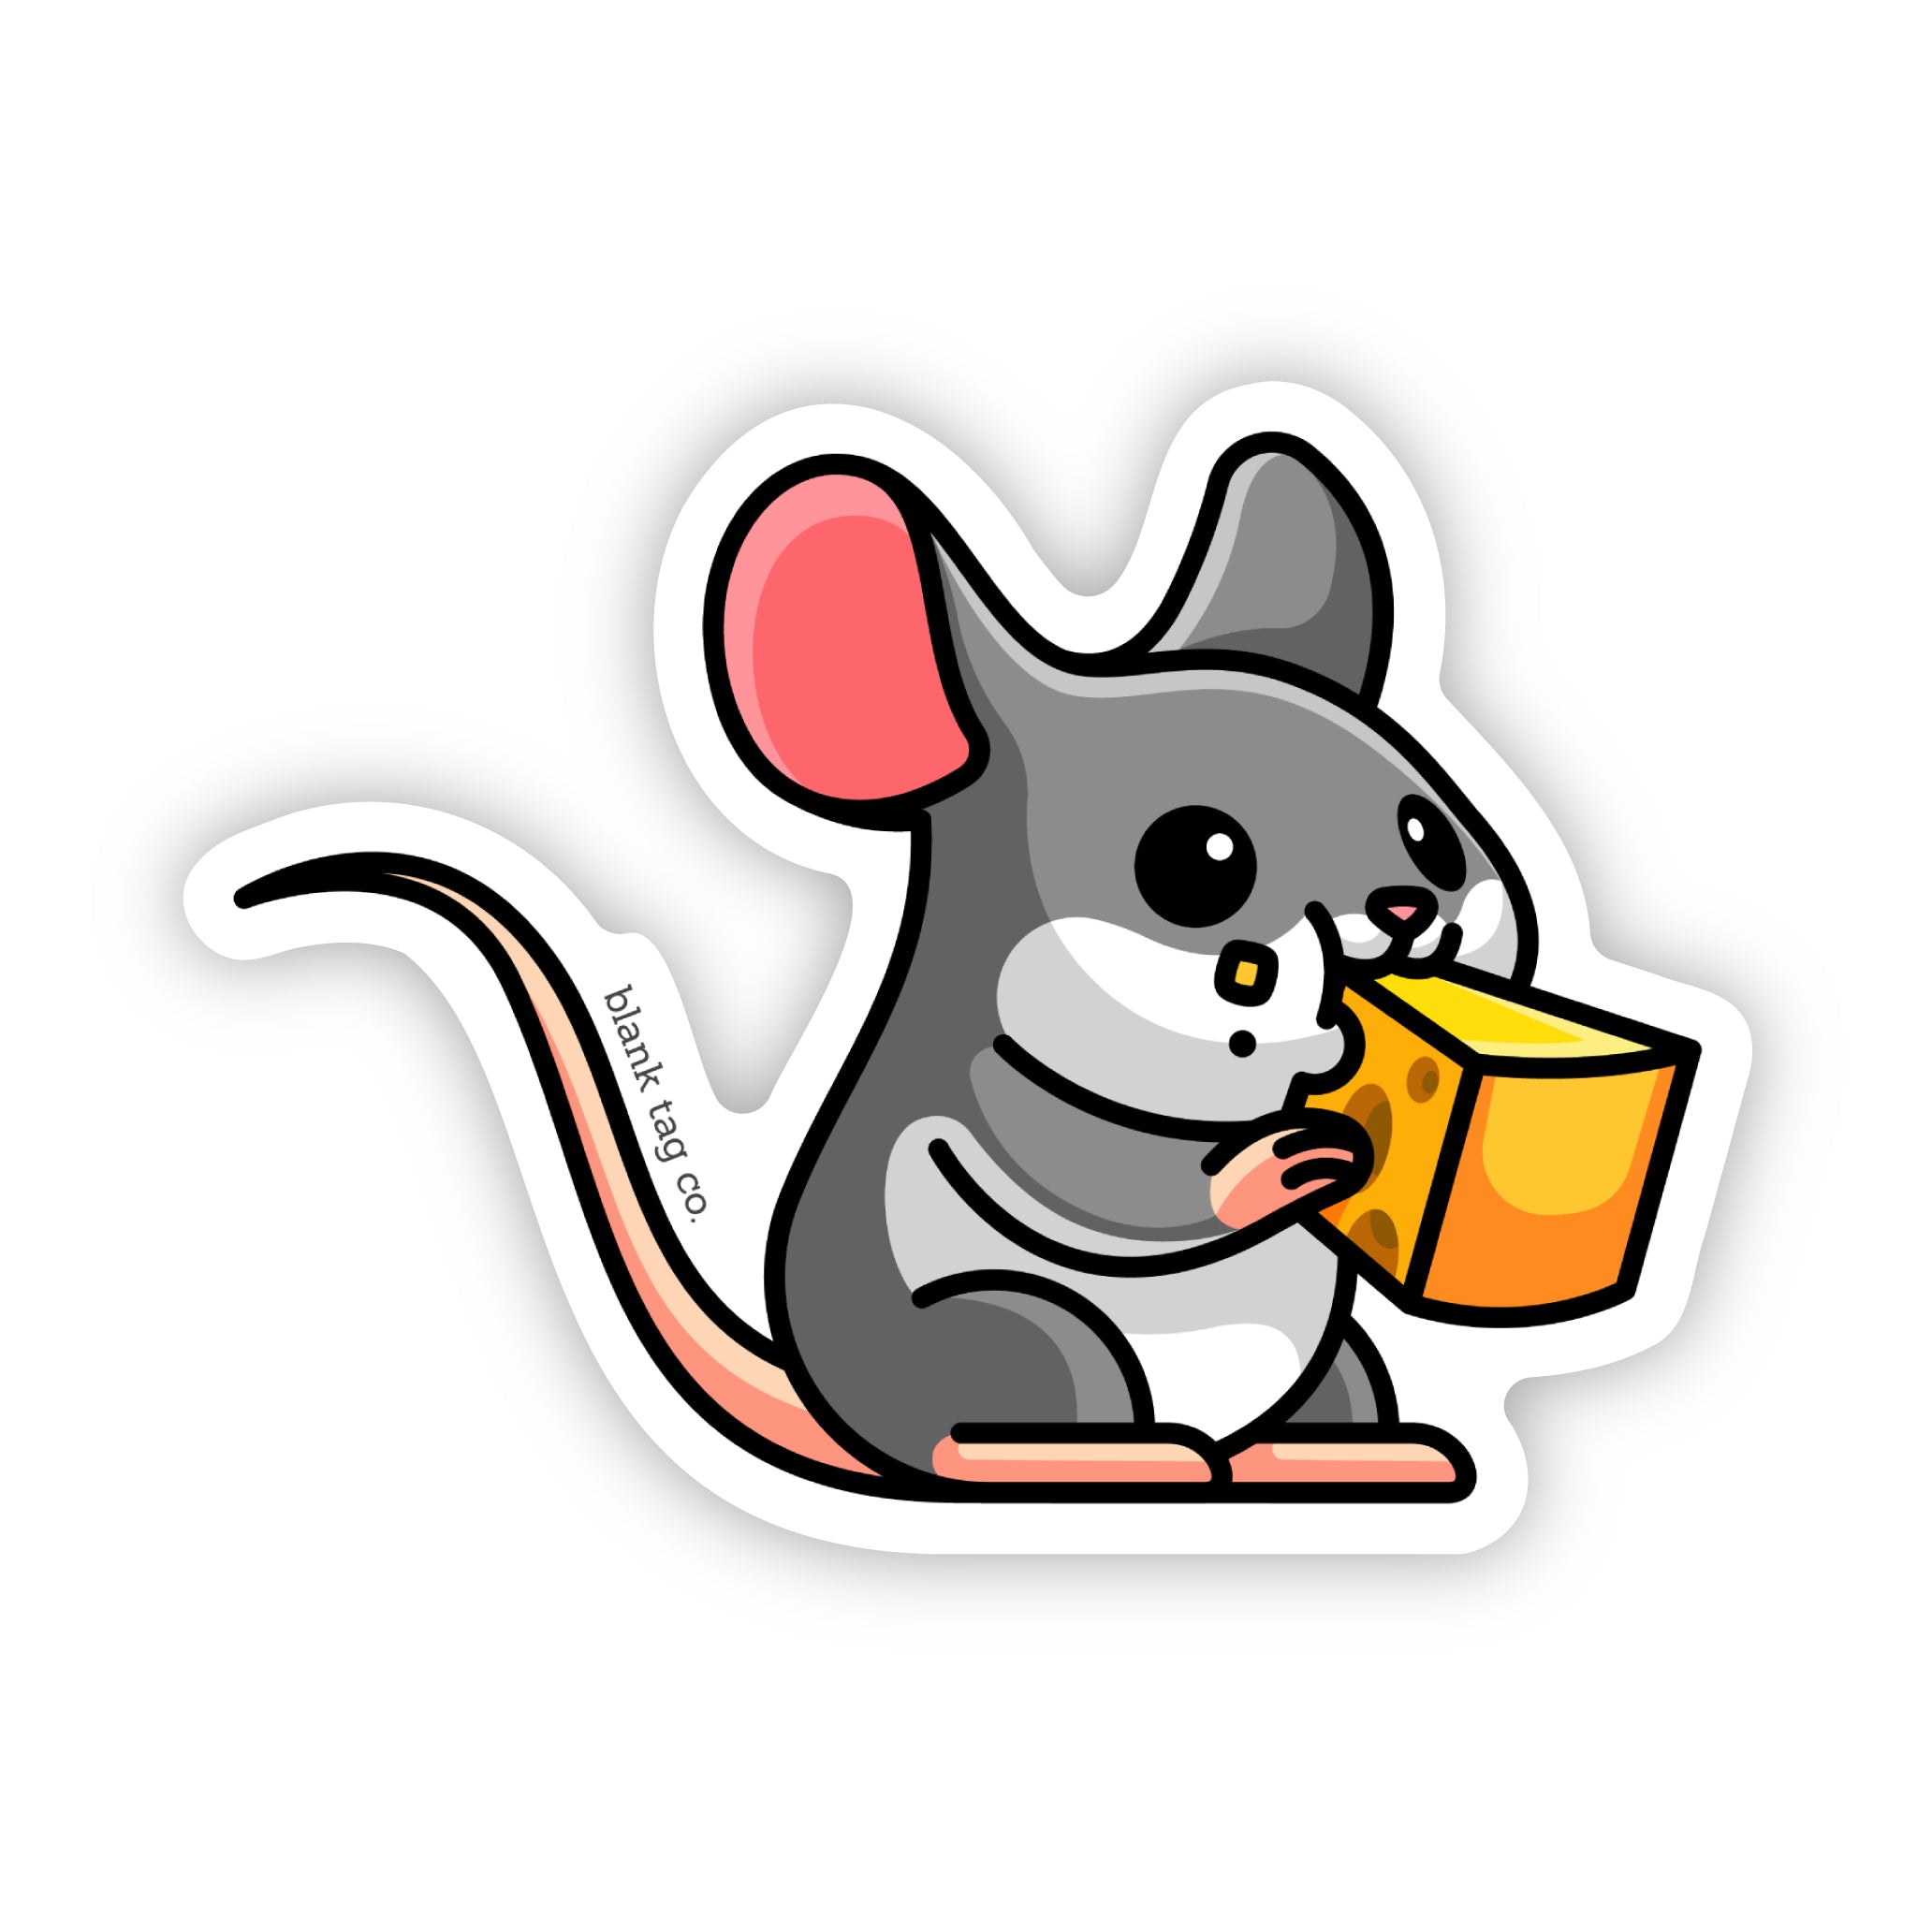 The Mouse Sticker